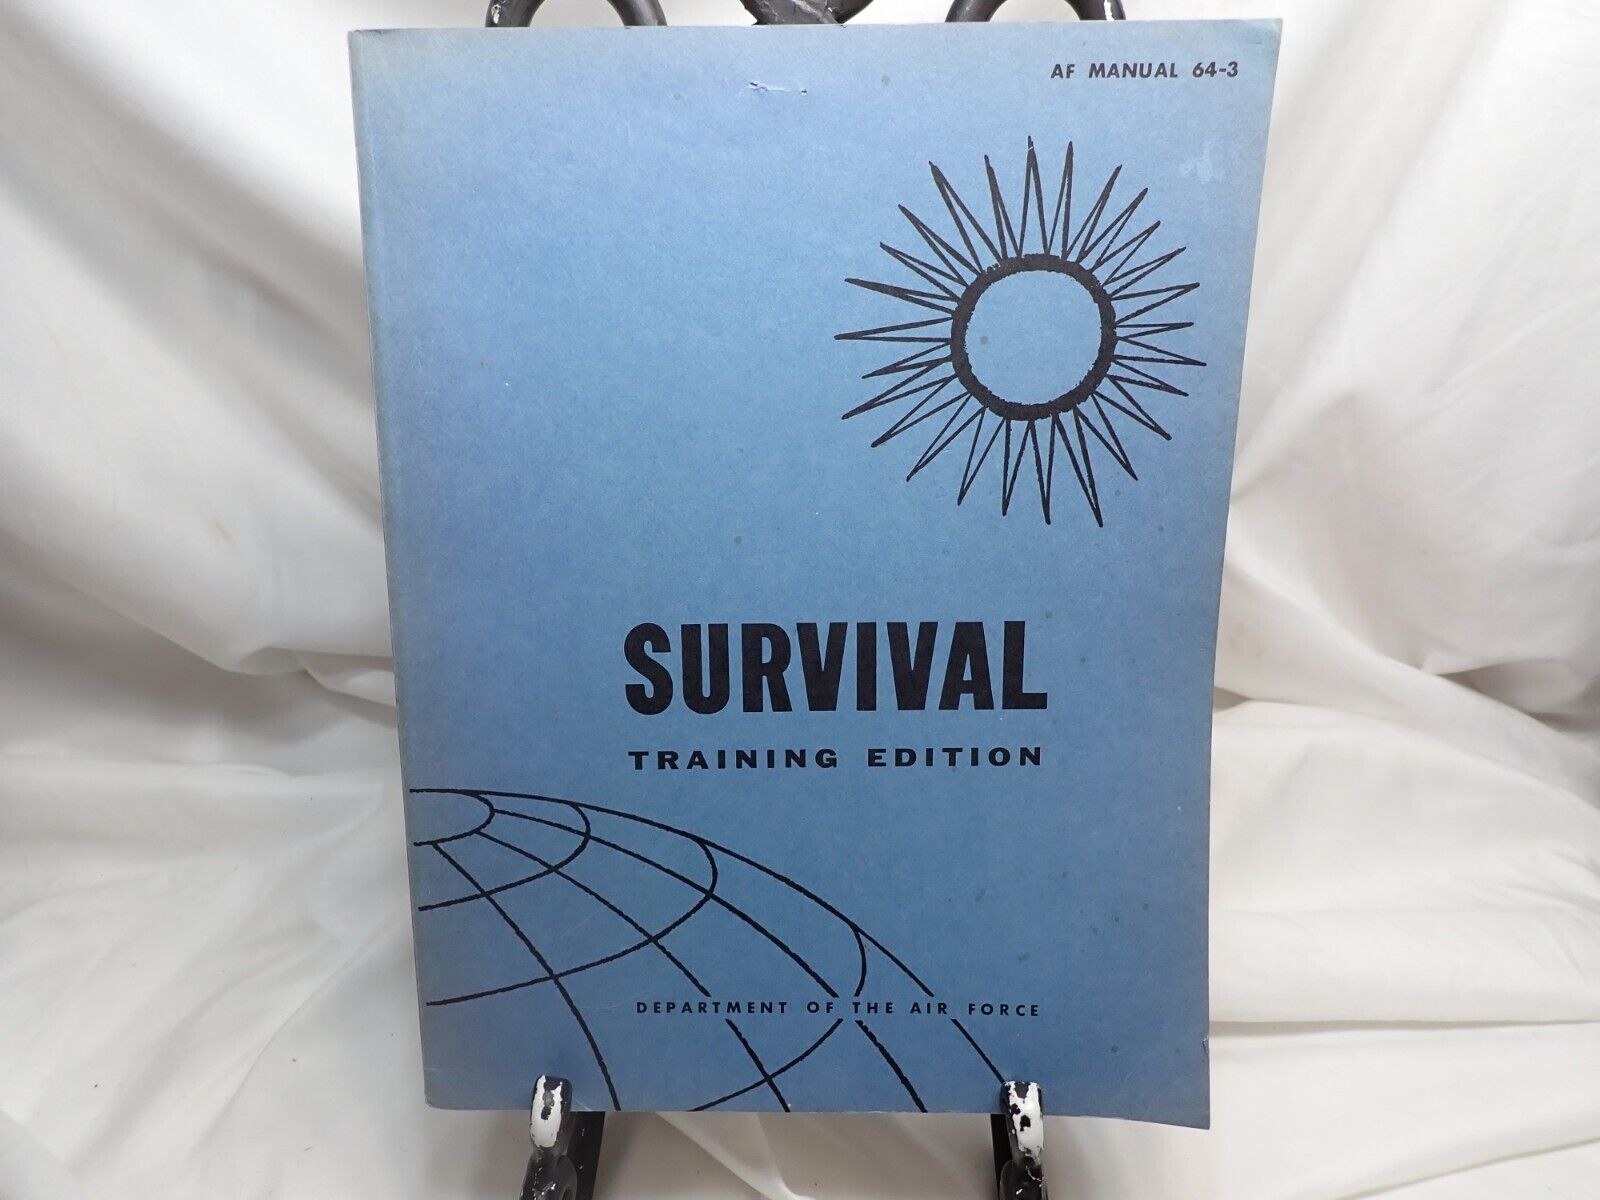 Vtg 1962 Department of the Air Force Survival Training Edition AF Manual 64-3